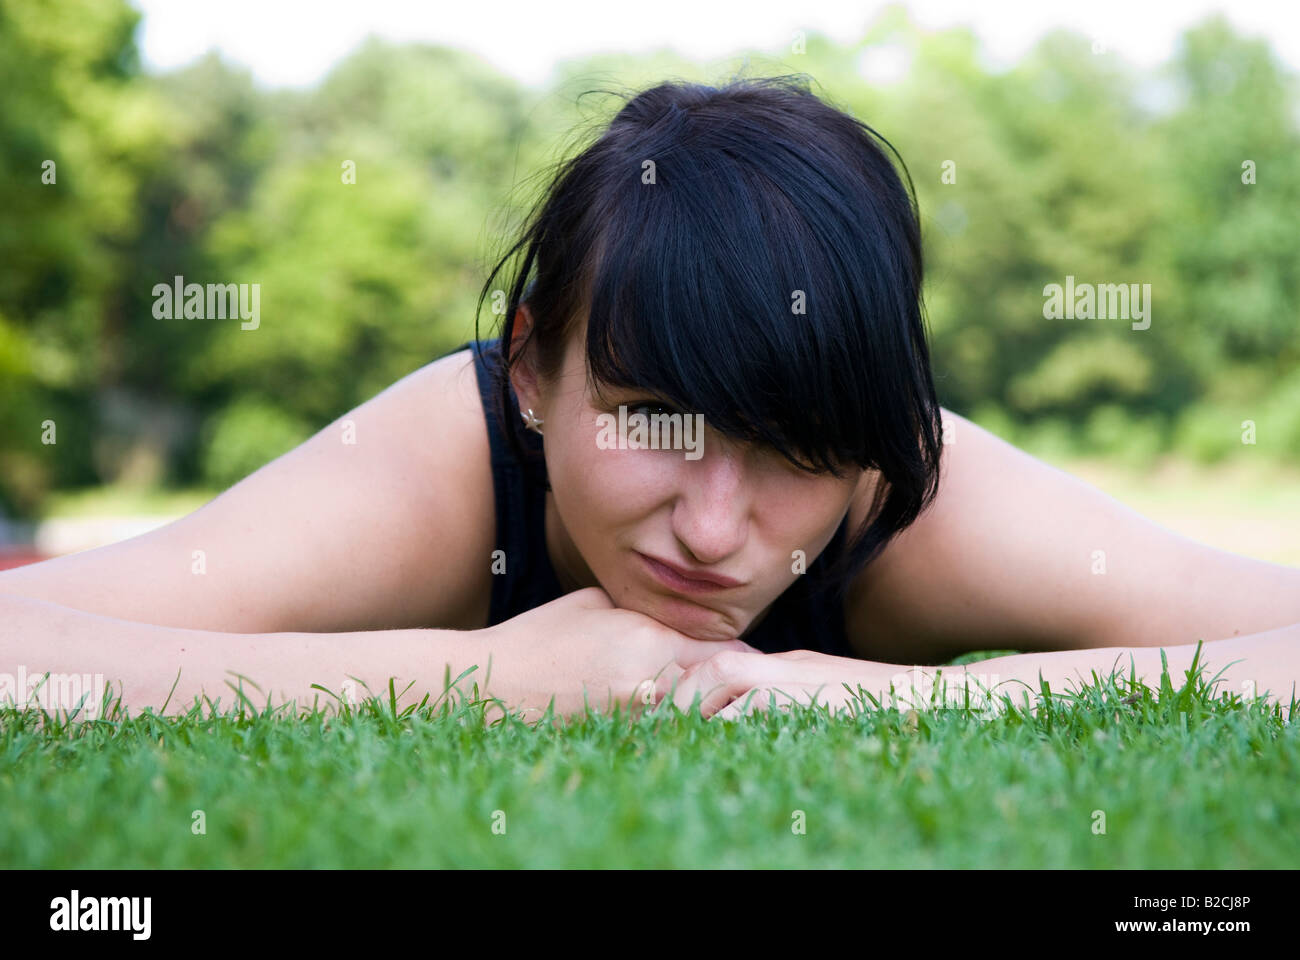 young female athlete lying exhaustedly on a lawn, training break Stock Photo